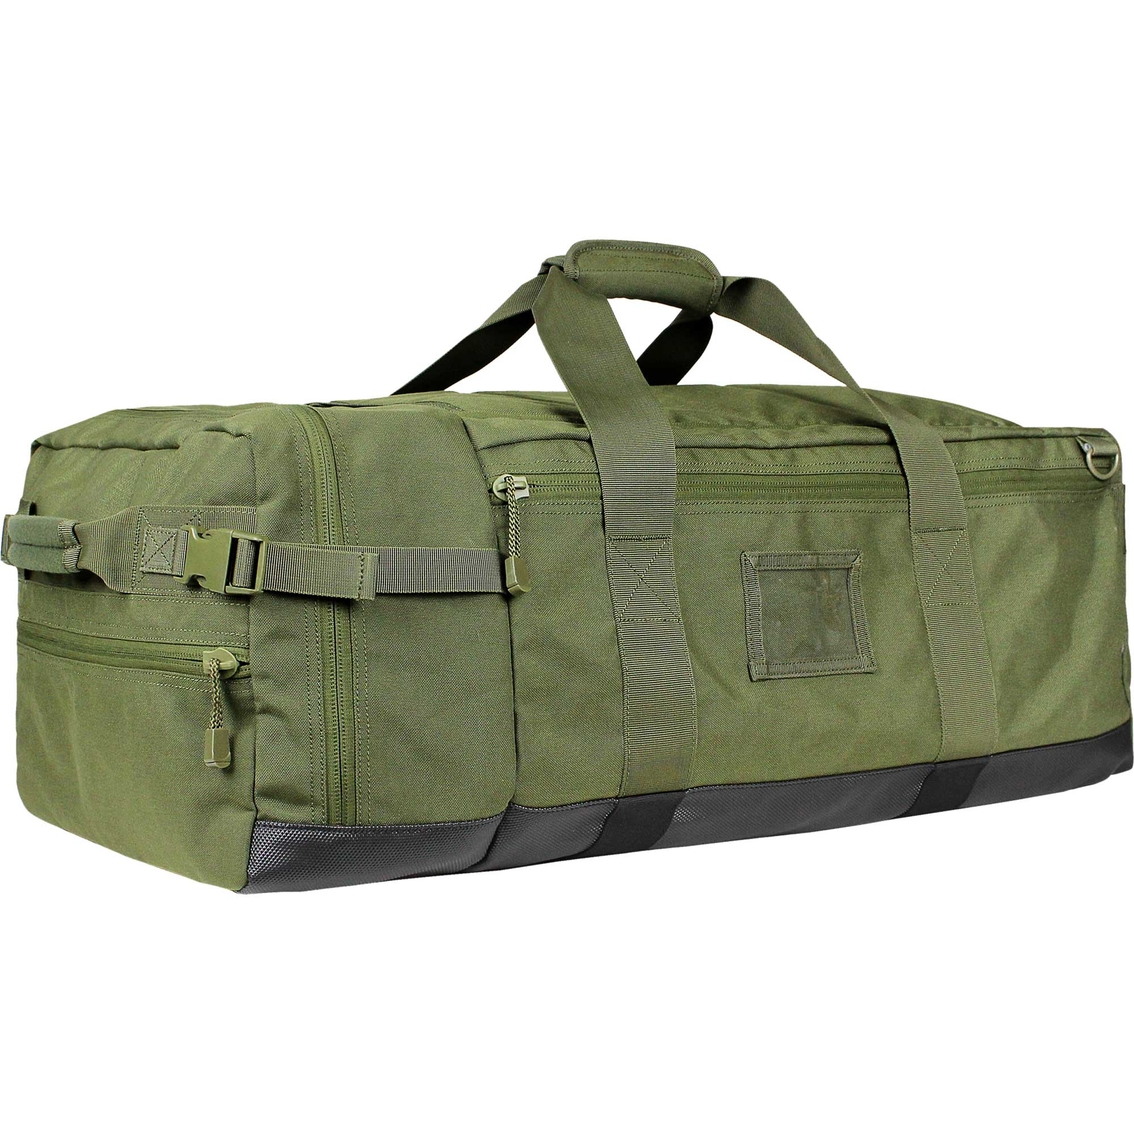 Condor Colossus Duffel Bag | Luggage | Clothing & Accessories | Shop ...